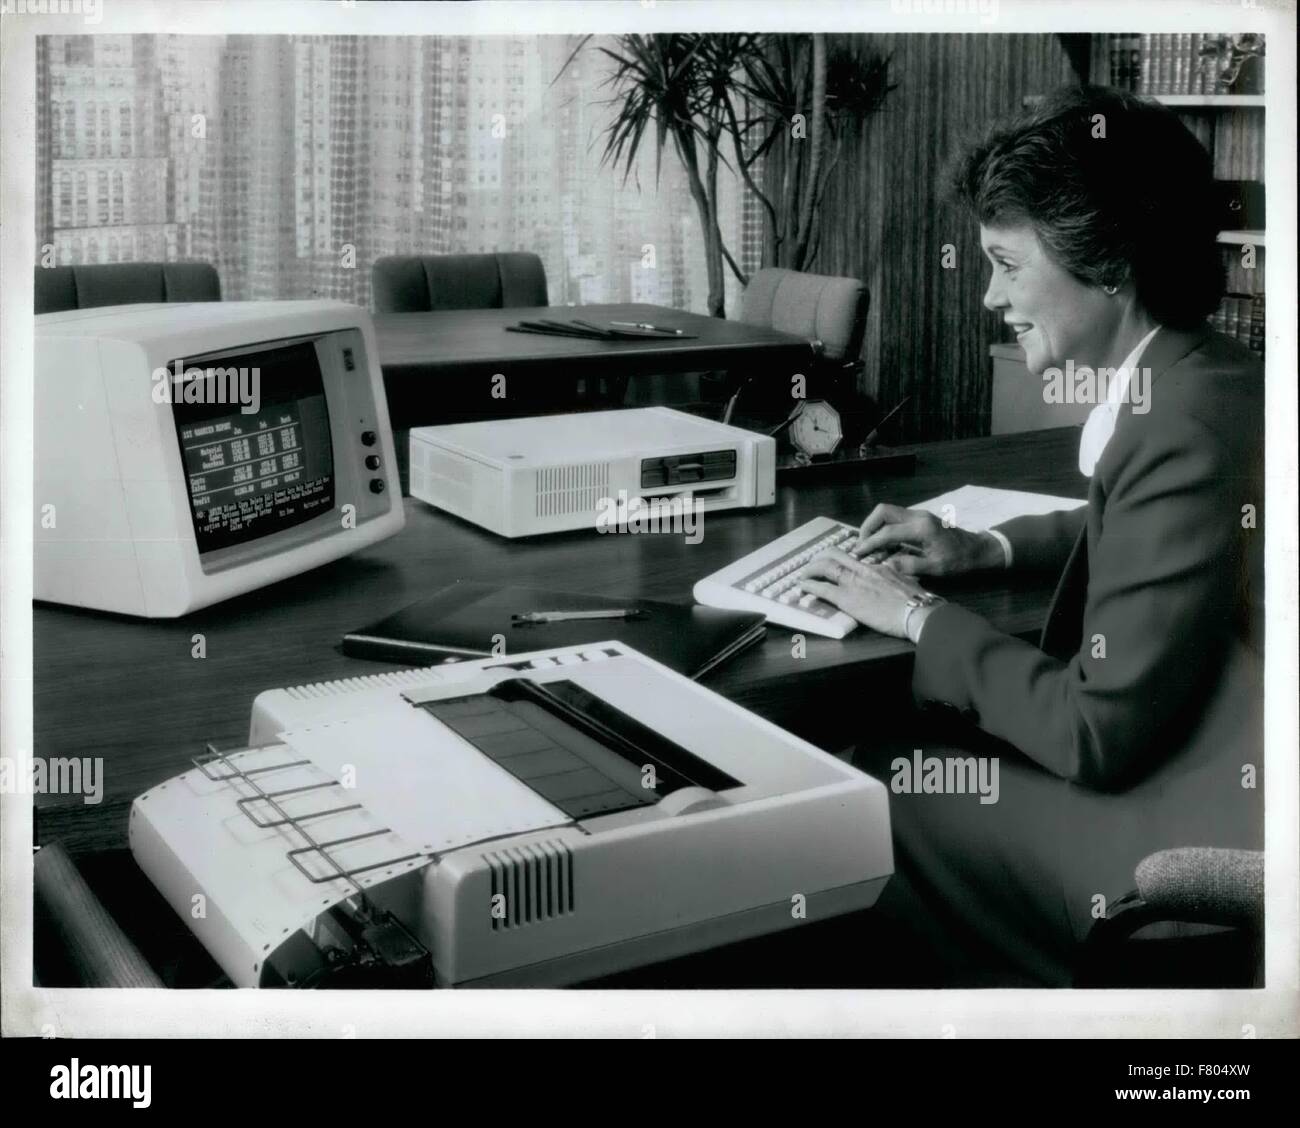 1981 - The Most Affordable computer ever offered by IBM, the Pcjr, is an easy-to-use and versatile system for use at home, in the classroom or at the office. A PCjr equipped with a diskette drive and 131,072 characters of user memory, and using IBM Personal Computer Disk Operating System 2.1, is compatible with many business and personal productivity programs available for other IBM Personal Computers. With an optional Parallel Printer Attachment, it can be connected to the IBM Personal Computer Graphics Printer. © Keystone Pictures USA/ZUMAPRESS.com/Alamy Live News Stock Photo